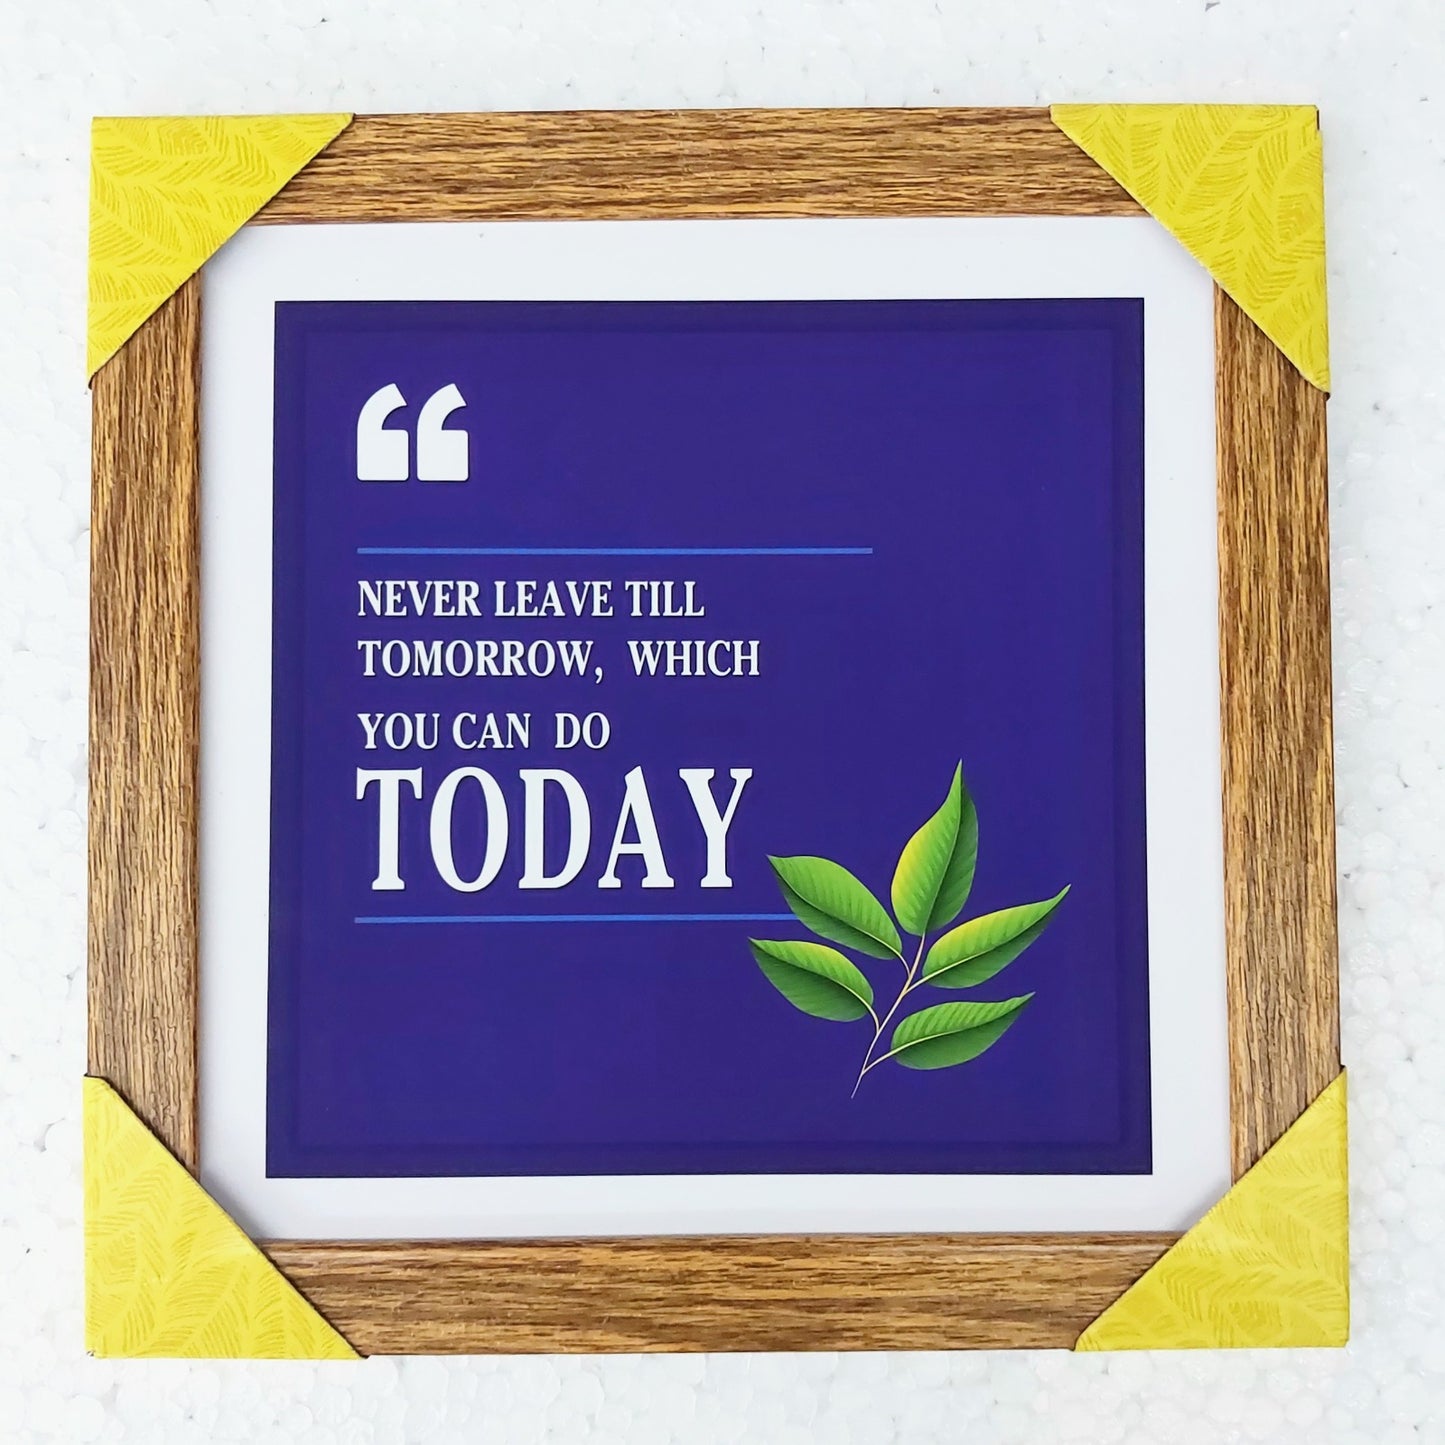 Motivational Quotes Frames for Coffee Shops | Wall Quotes Frames (8X8 Inch, 1Pcs)